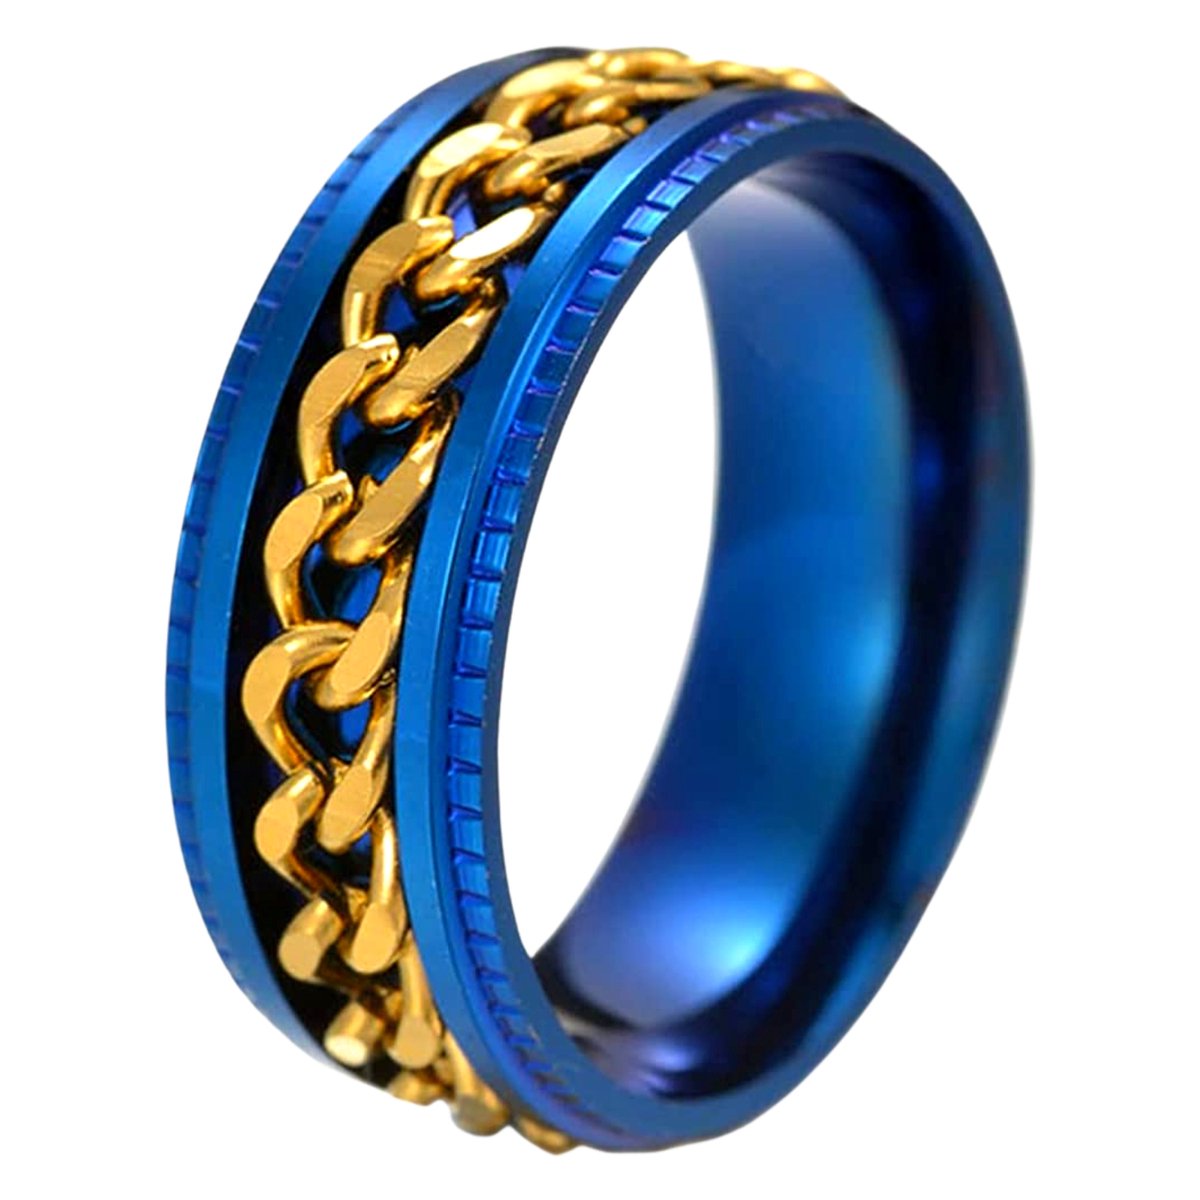 Anxiety Ring - (Ketting) - Stress Ring - Fidget Ring - Anxiety Ring For Finger - Draaibare Ring - Spinning Ring - Blauw-Goud - (23.25mm / maat 73)